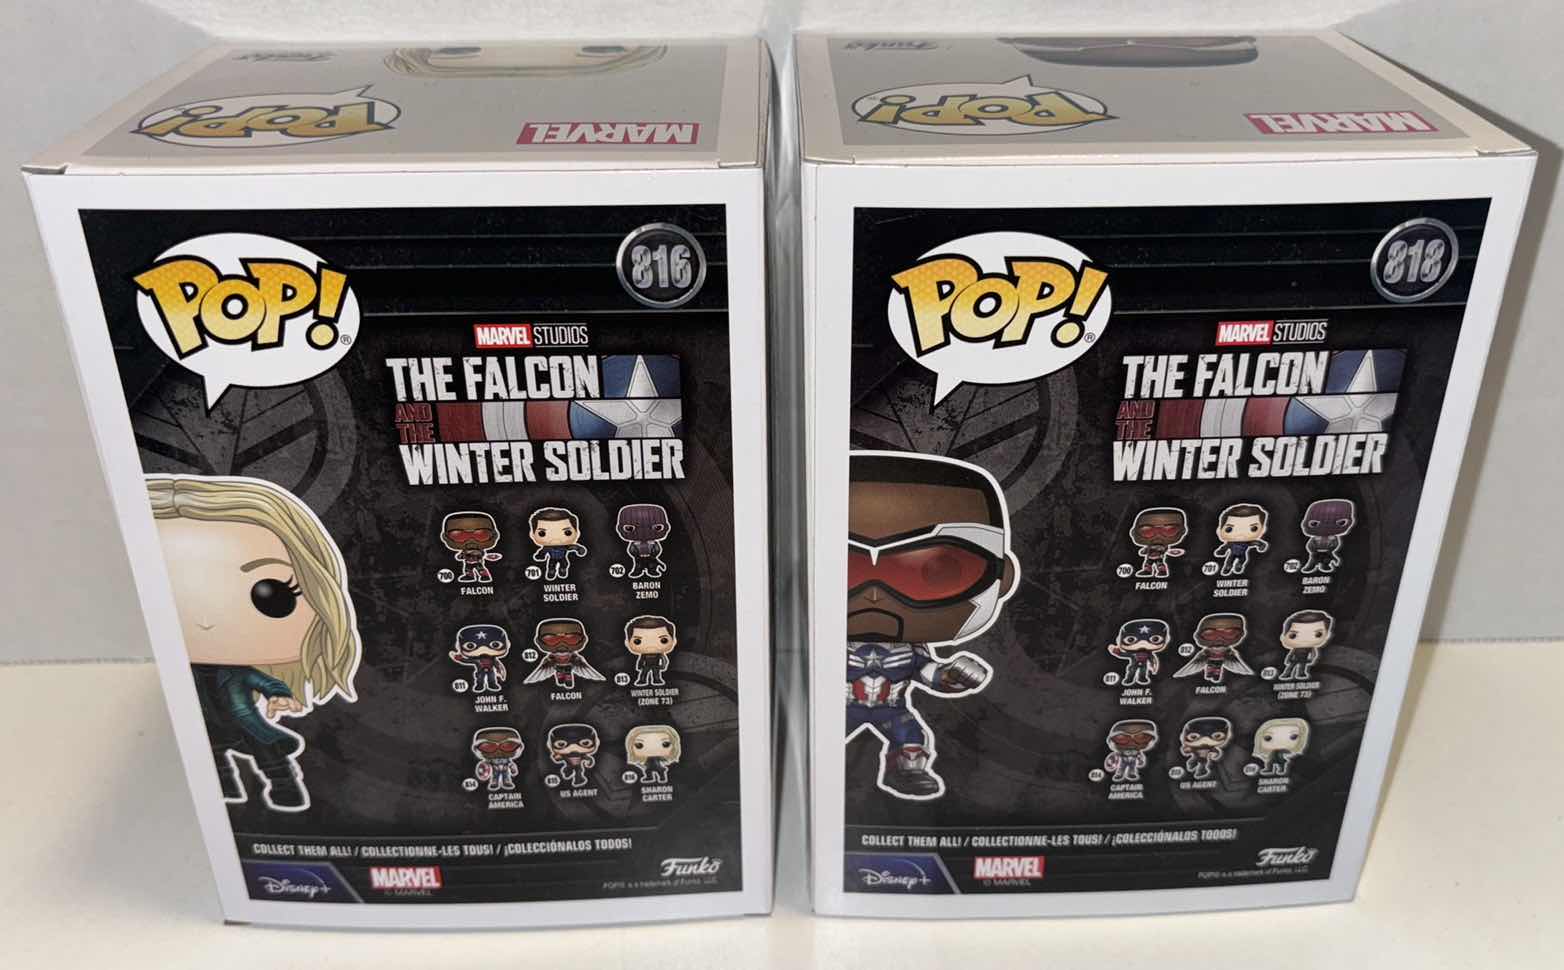 Photo 3 of NEW FUNKO POP! MARVEL STUDIOS VINYL FIGURES 2-PACK, THE FALCON AND THE WINTER SOLDIER #816 SHARON CARTER & #818 CAPTAIN AMERICA